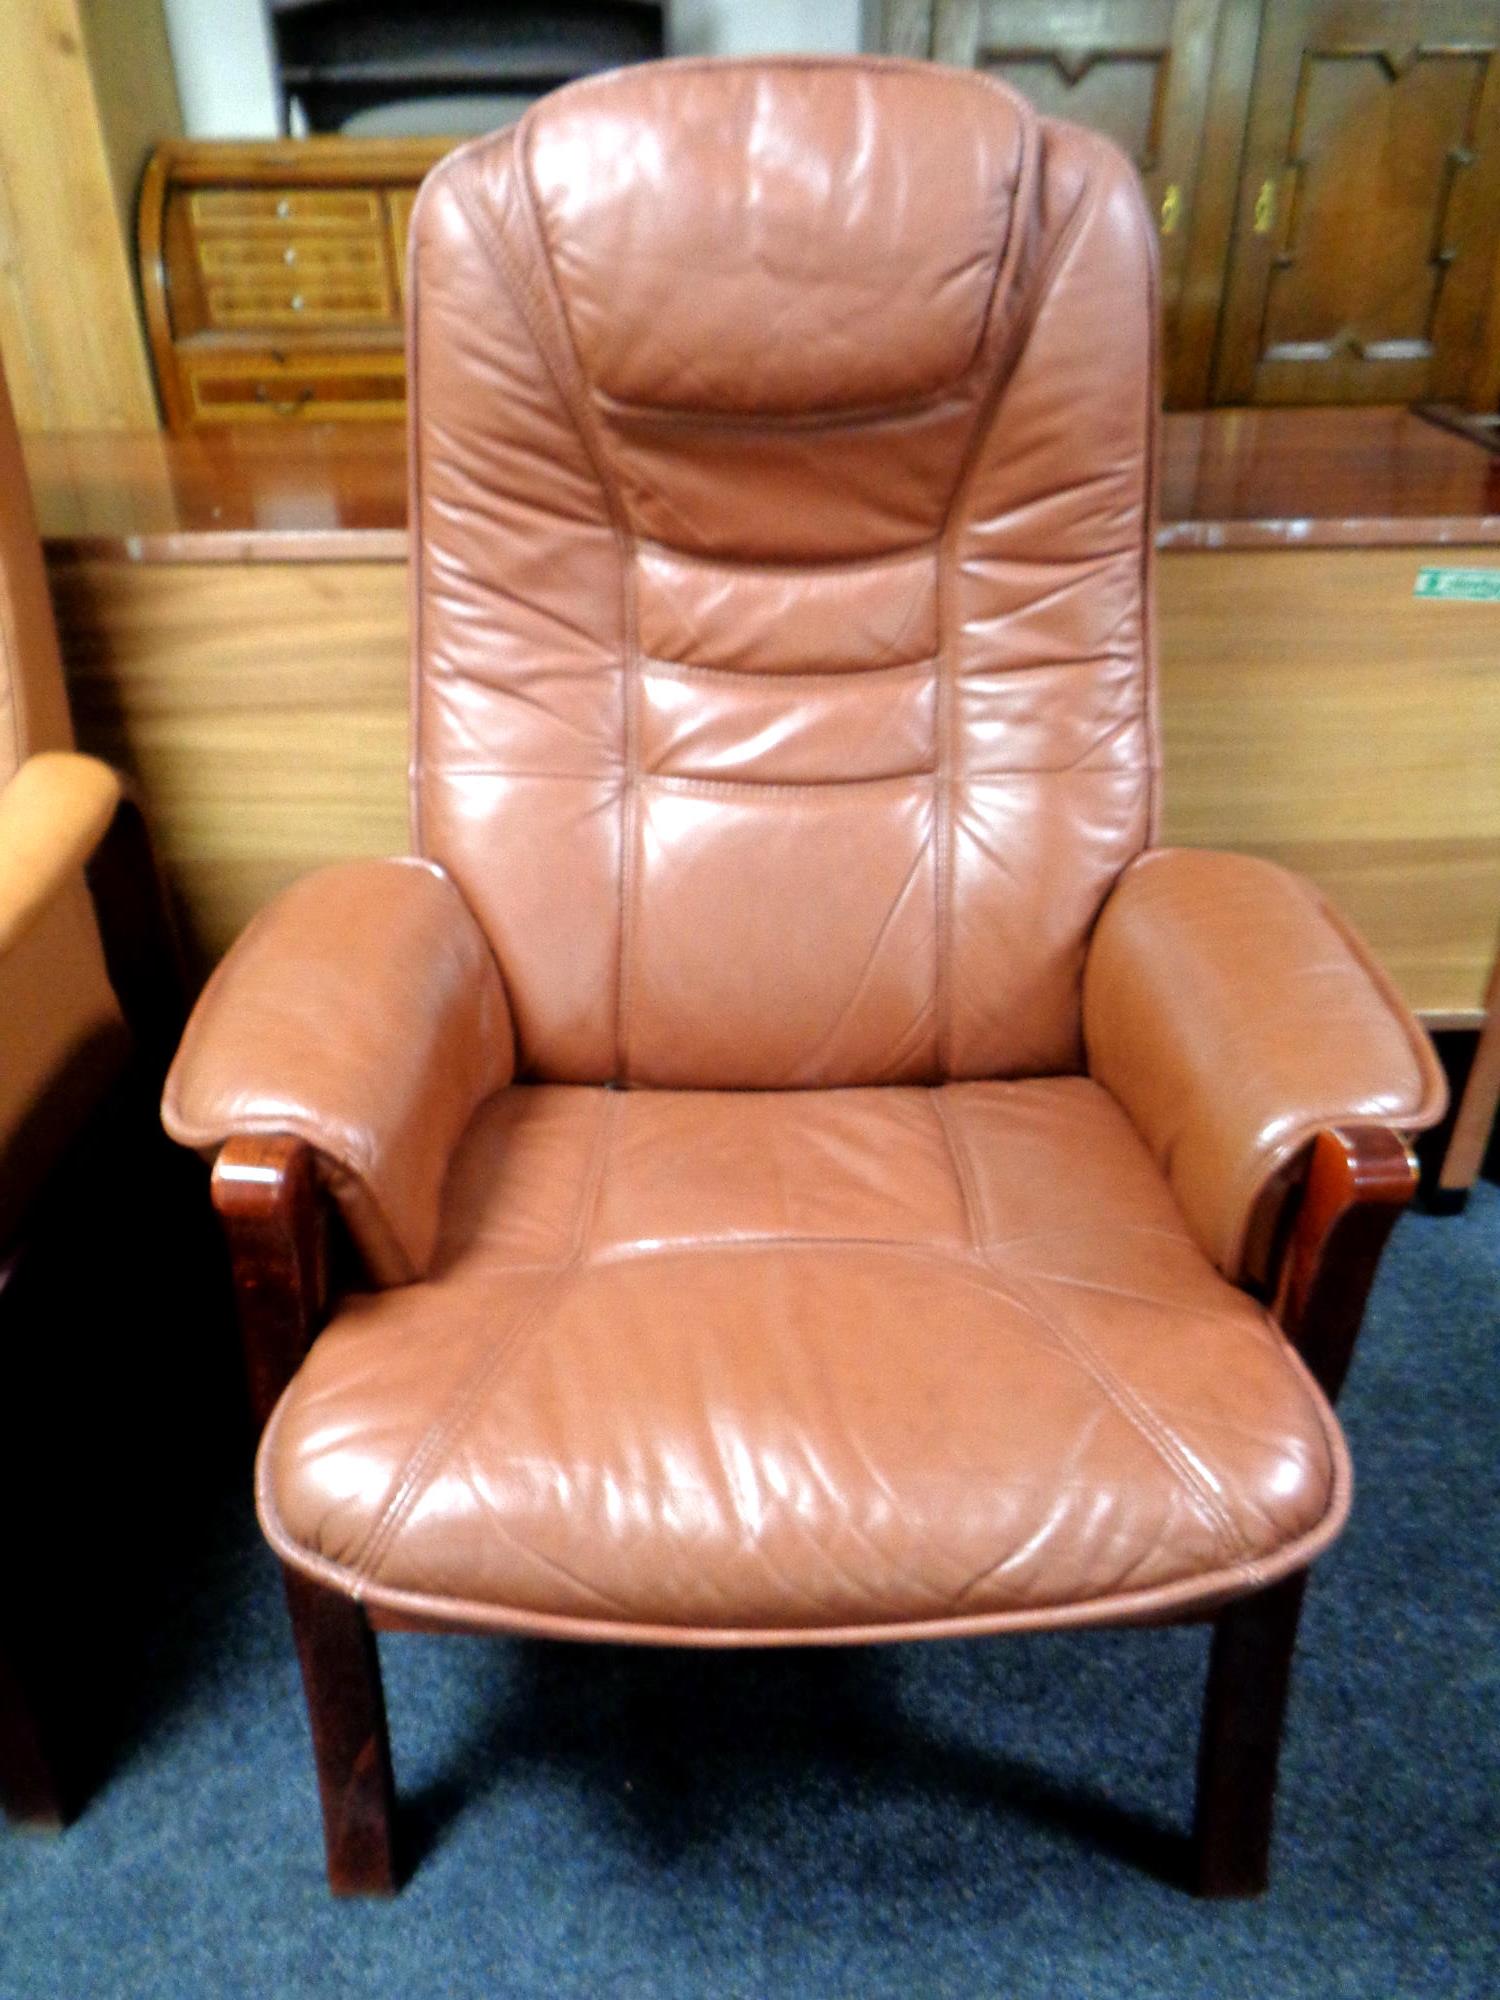 A brown leather upholstered armchair